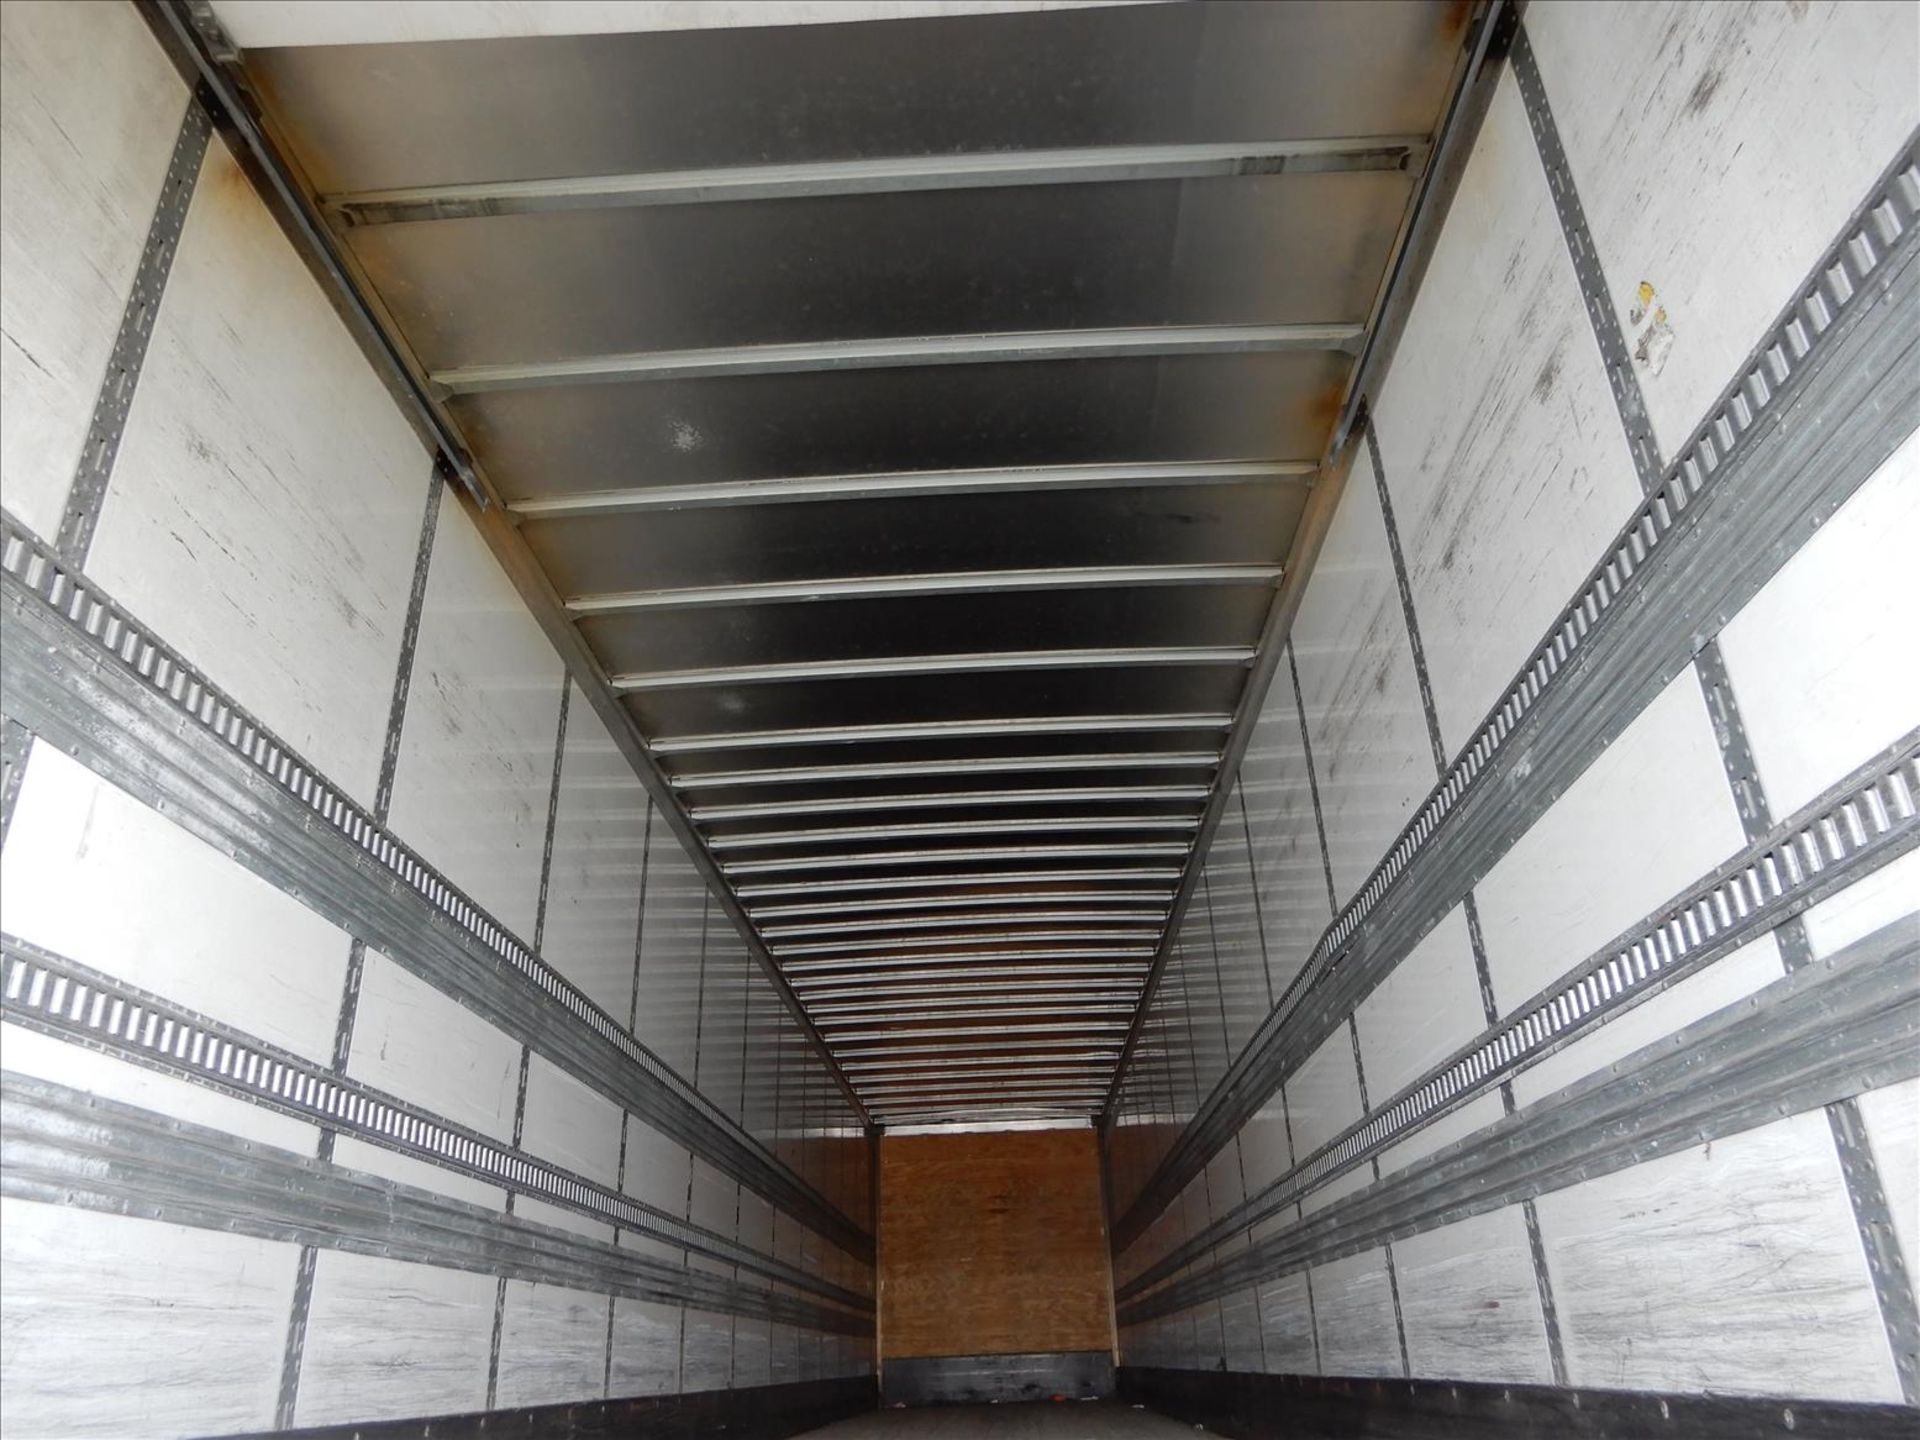 2012 Stoughton Trailer - Located in Indianapolis, IN - Image 27 of 31